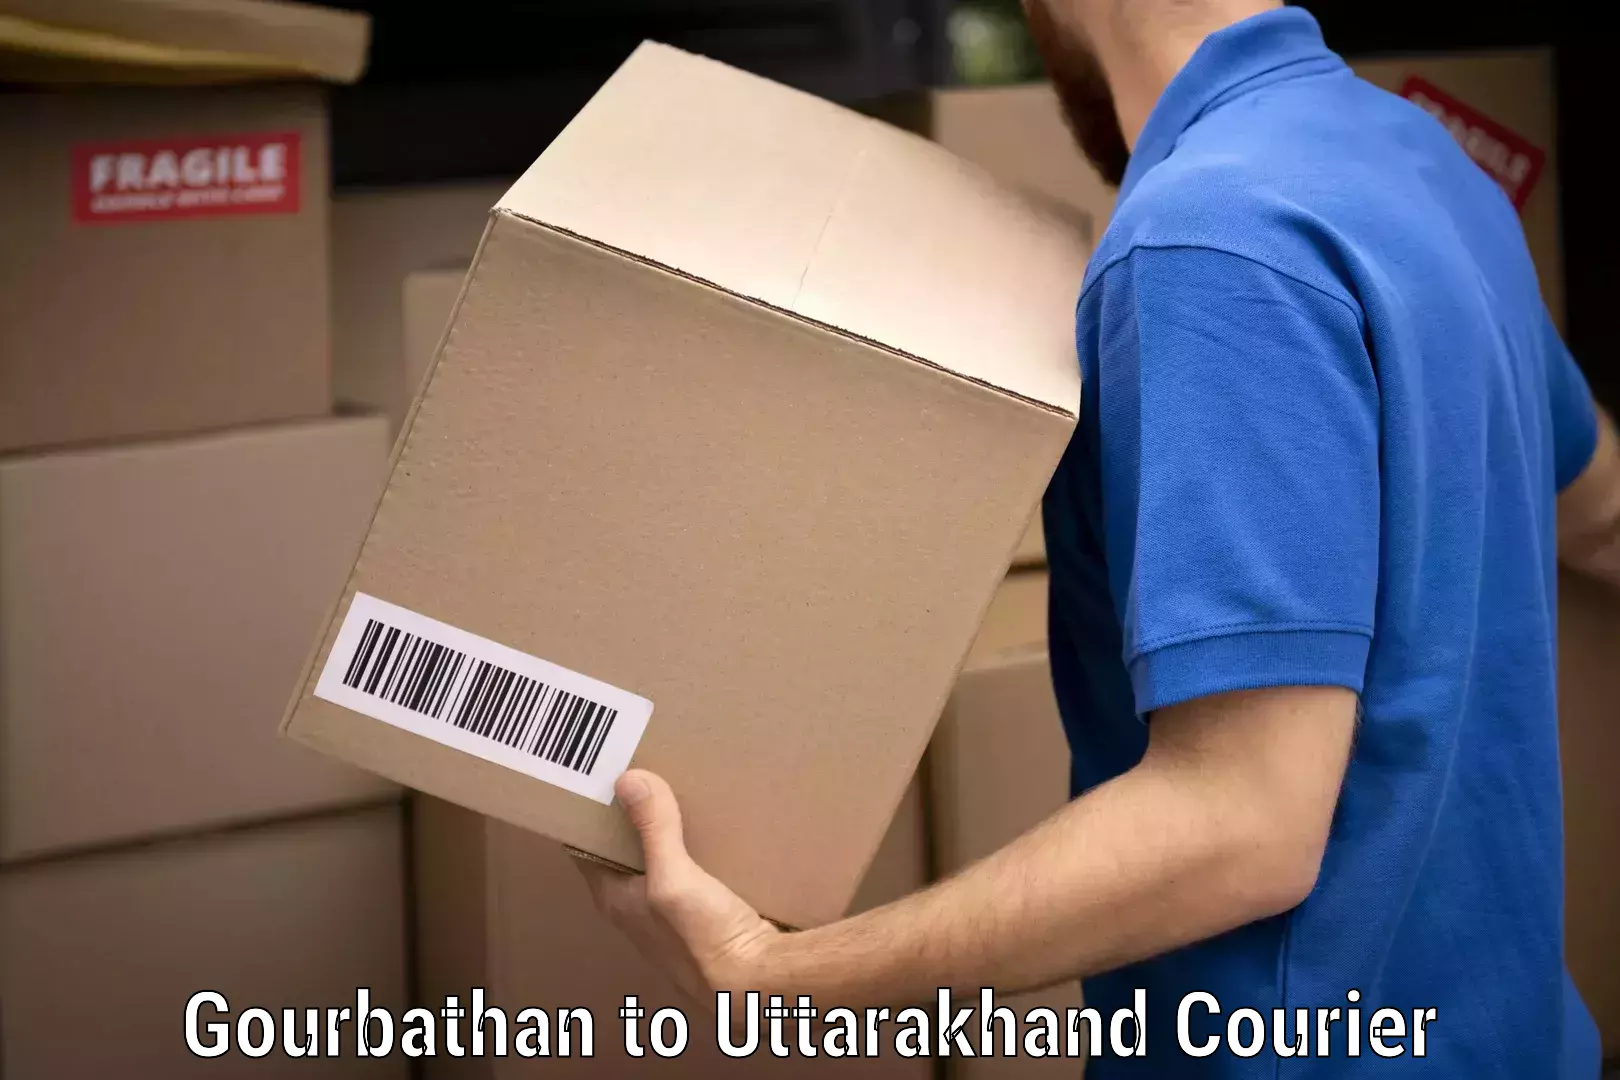 Moving and packing experts Gourbathan to Uttarakhand